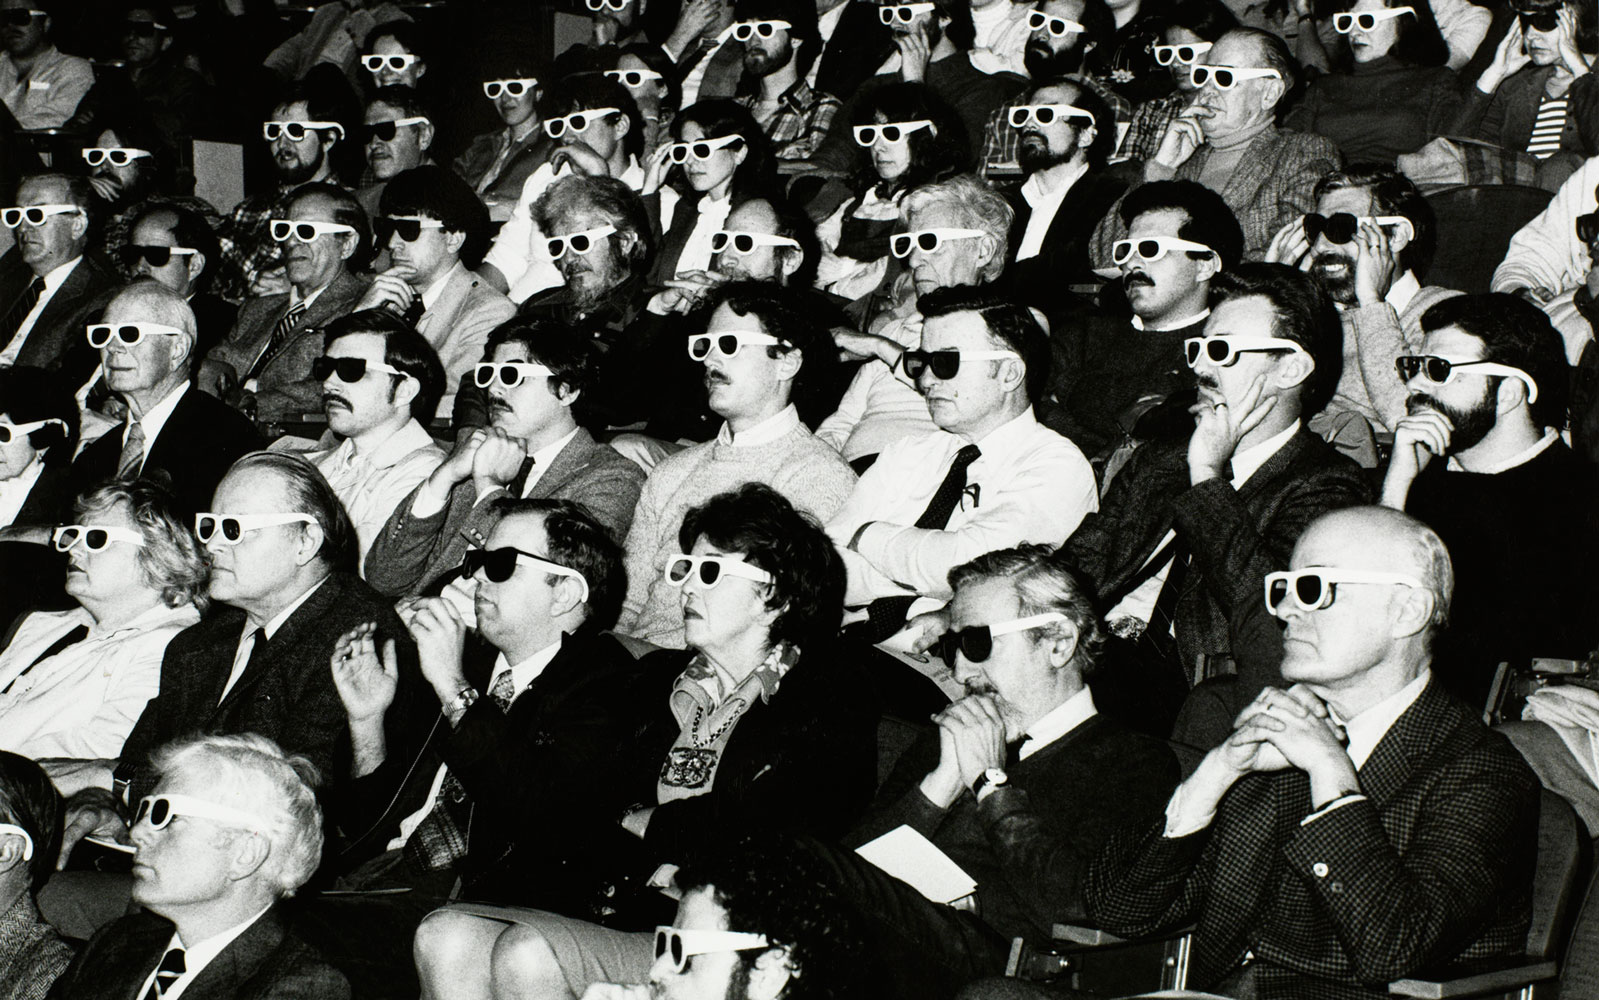 Theater audience wearing 3-d glasses, 1980-1995